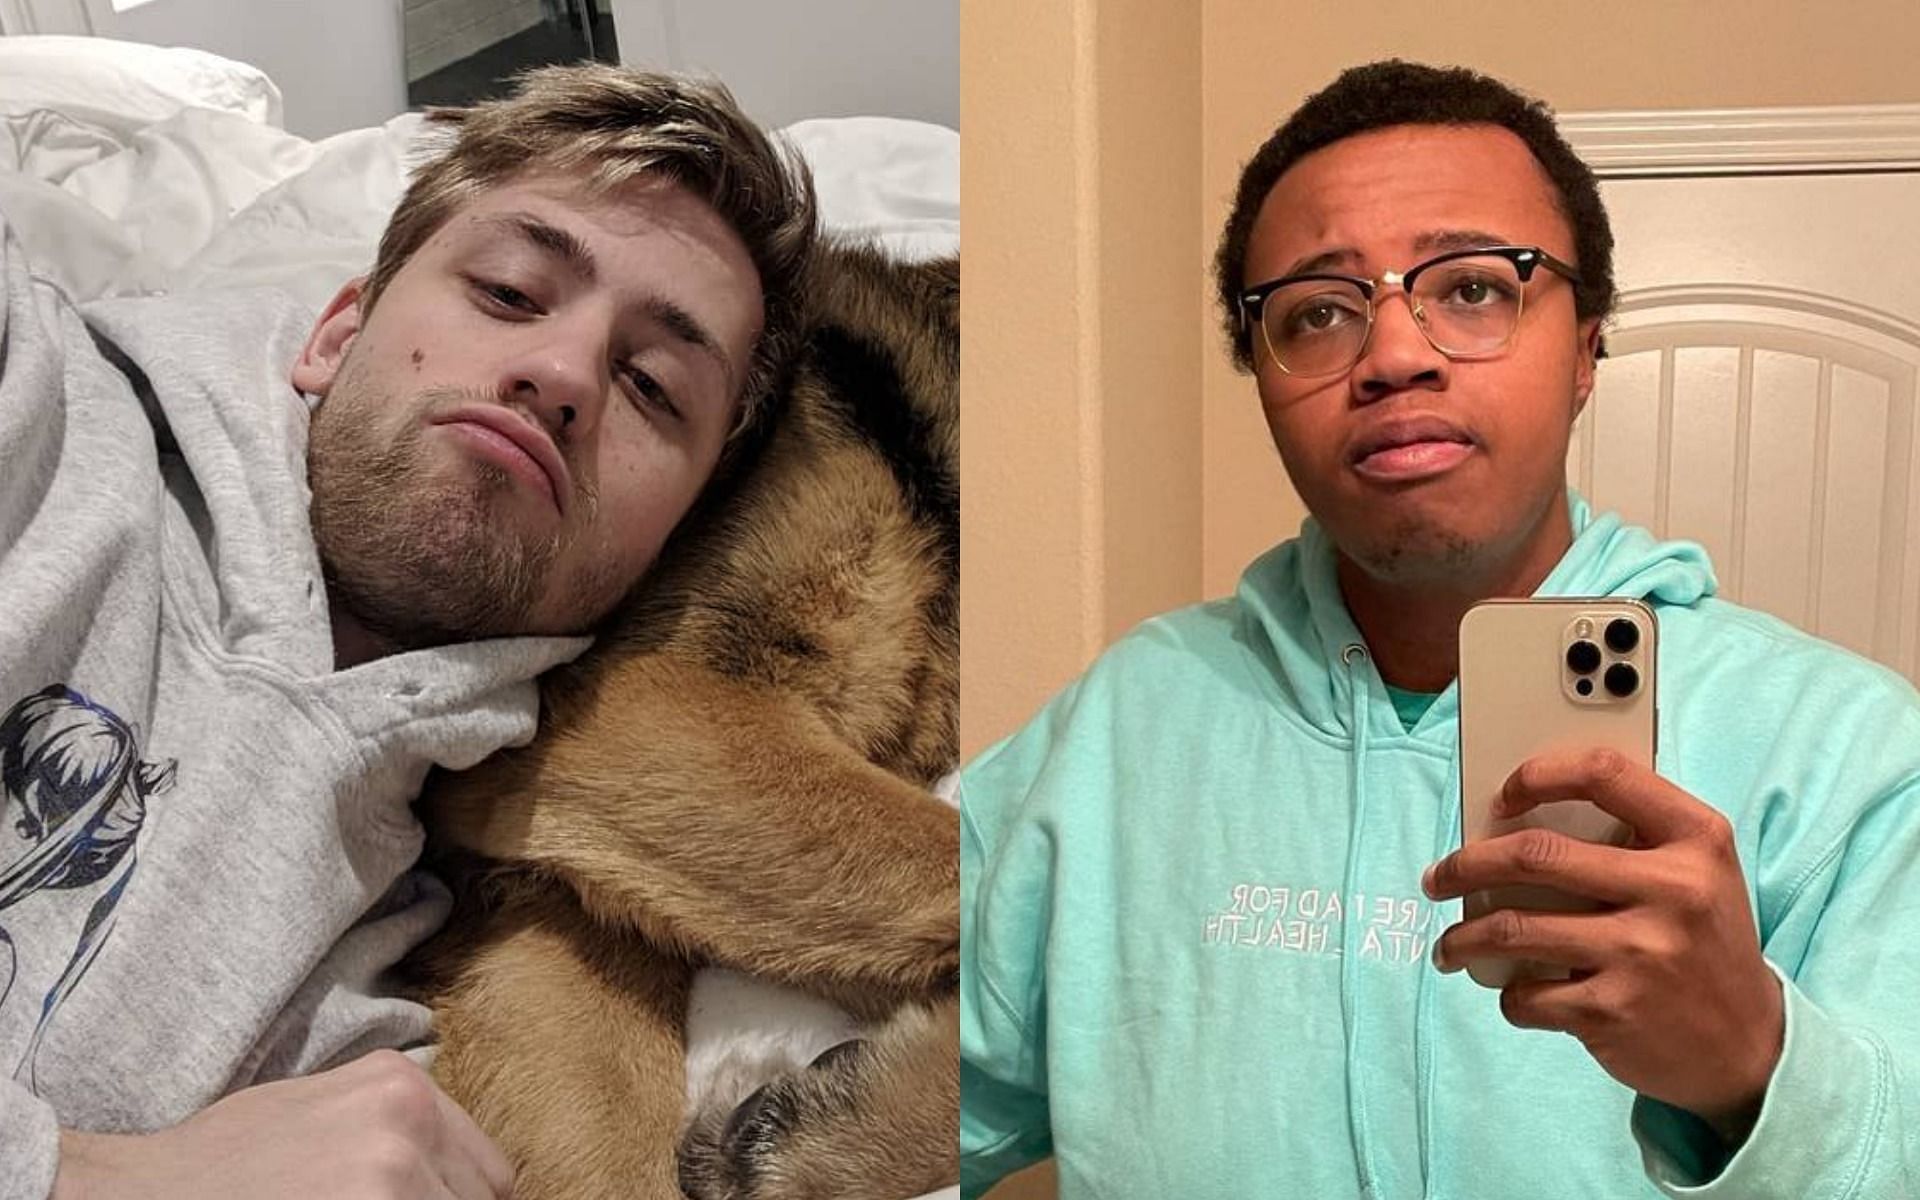 Russel tricks Sodapoppin several times (Images via Instagram/sodapoppintv/twitchrussel)